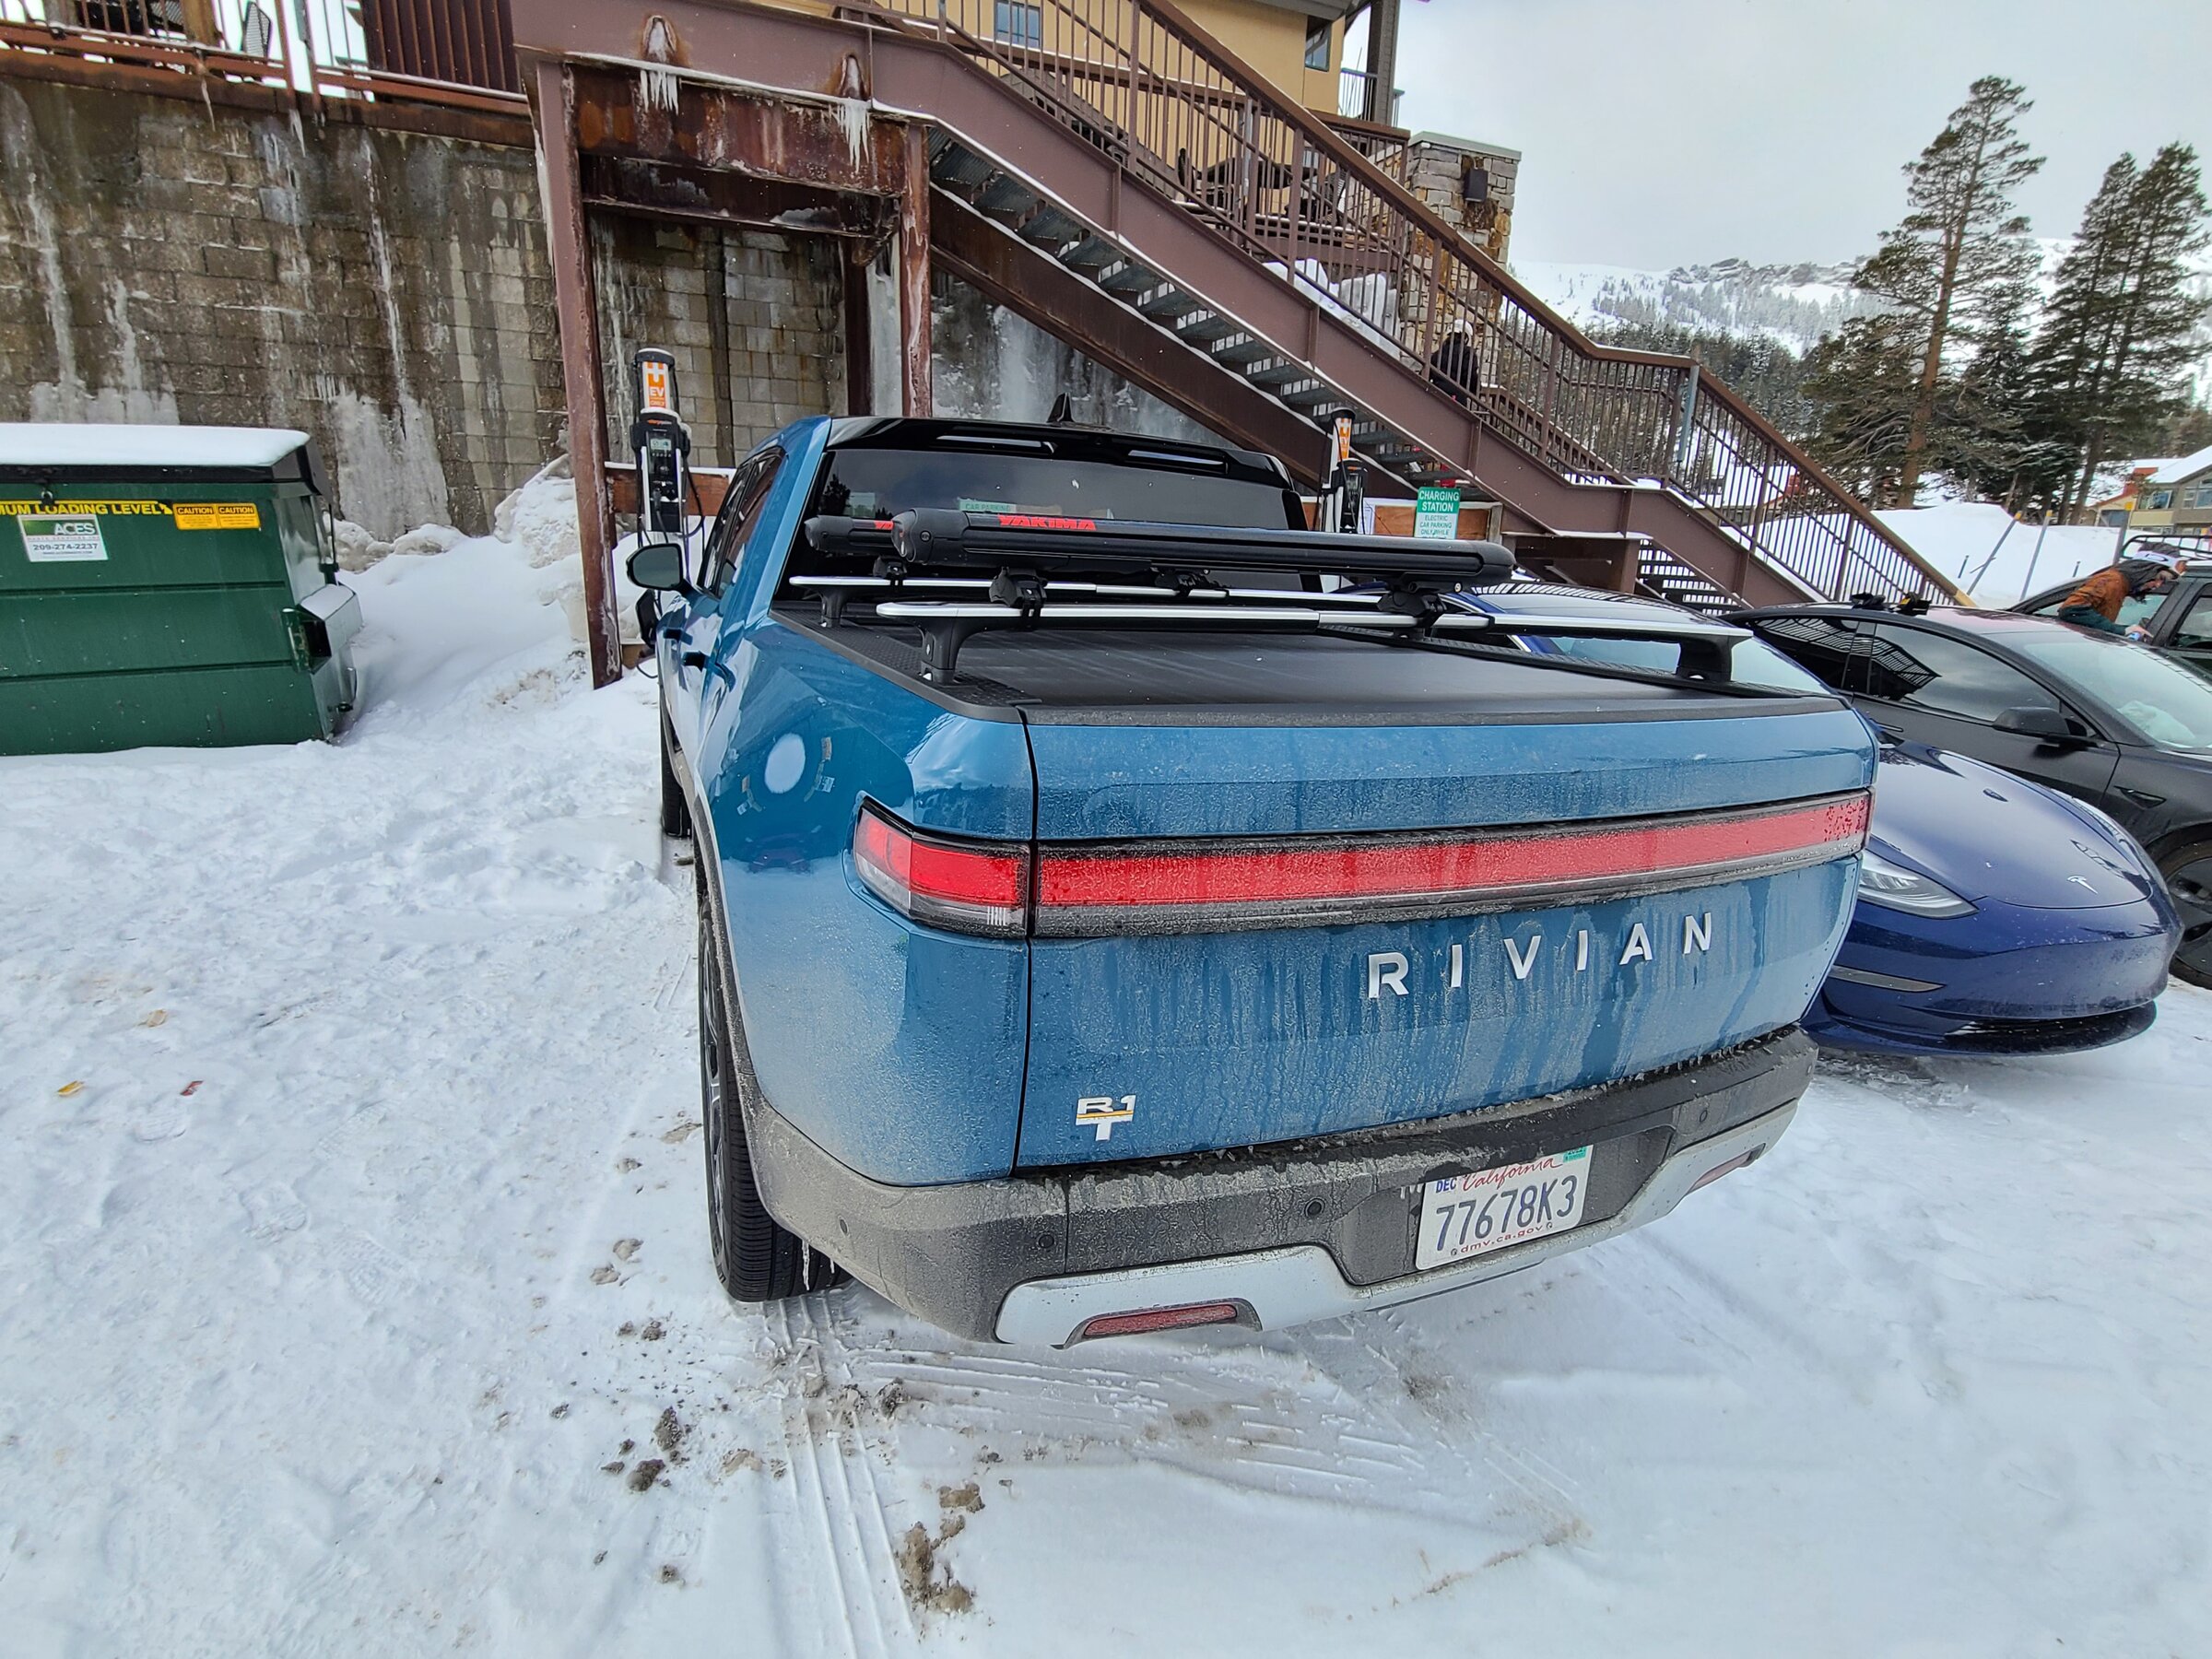 Rivian R1T R1S Rivian R1T spotted in South Seattle today! (photos, videos, impressions) 20220305_101149